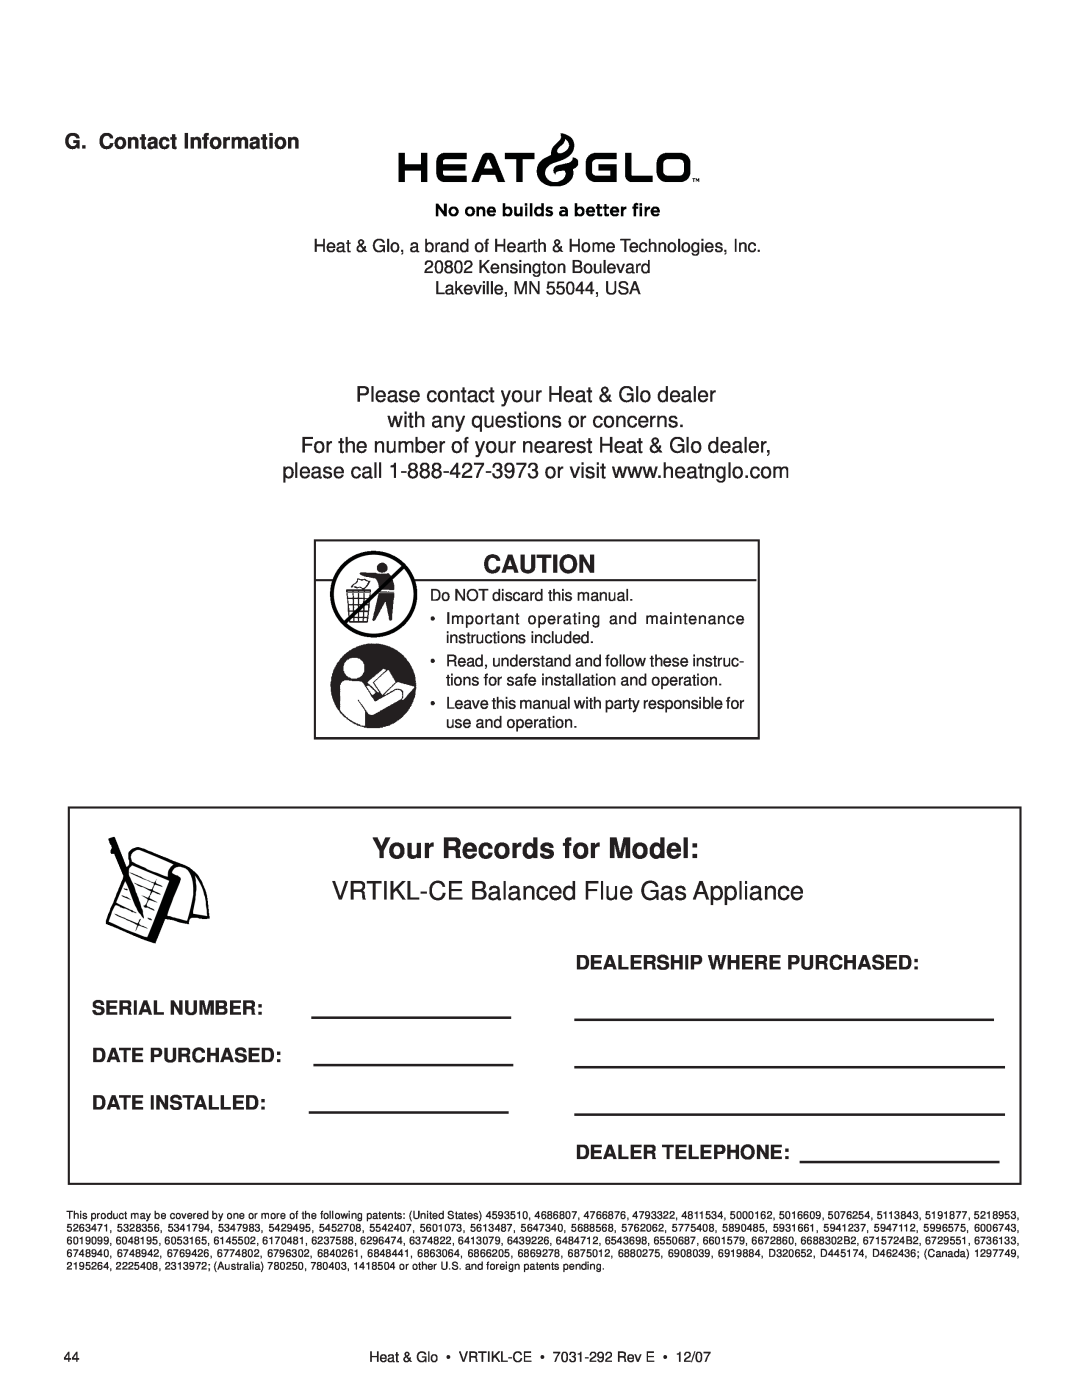 Hearth and Home Technologies VRT-GY-B-CE manual Your Records for Model, G. Contact Information, Dealership Where Purchased 